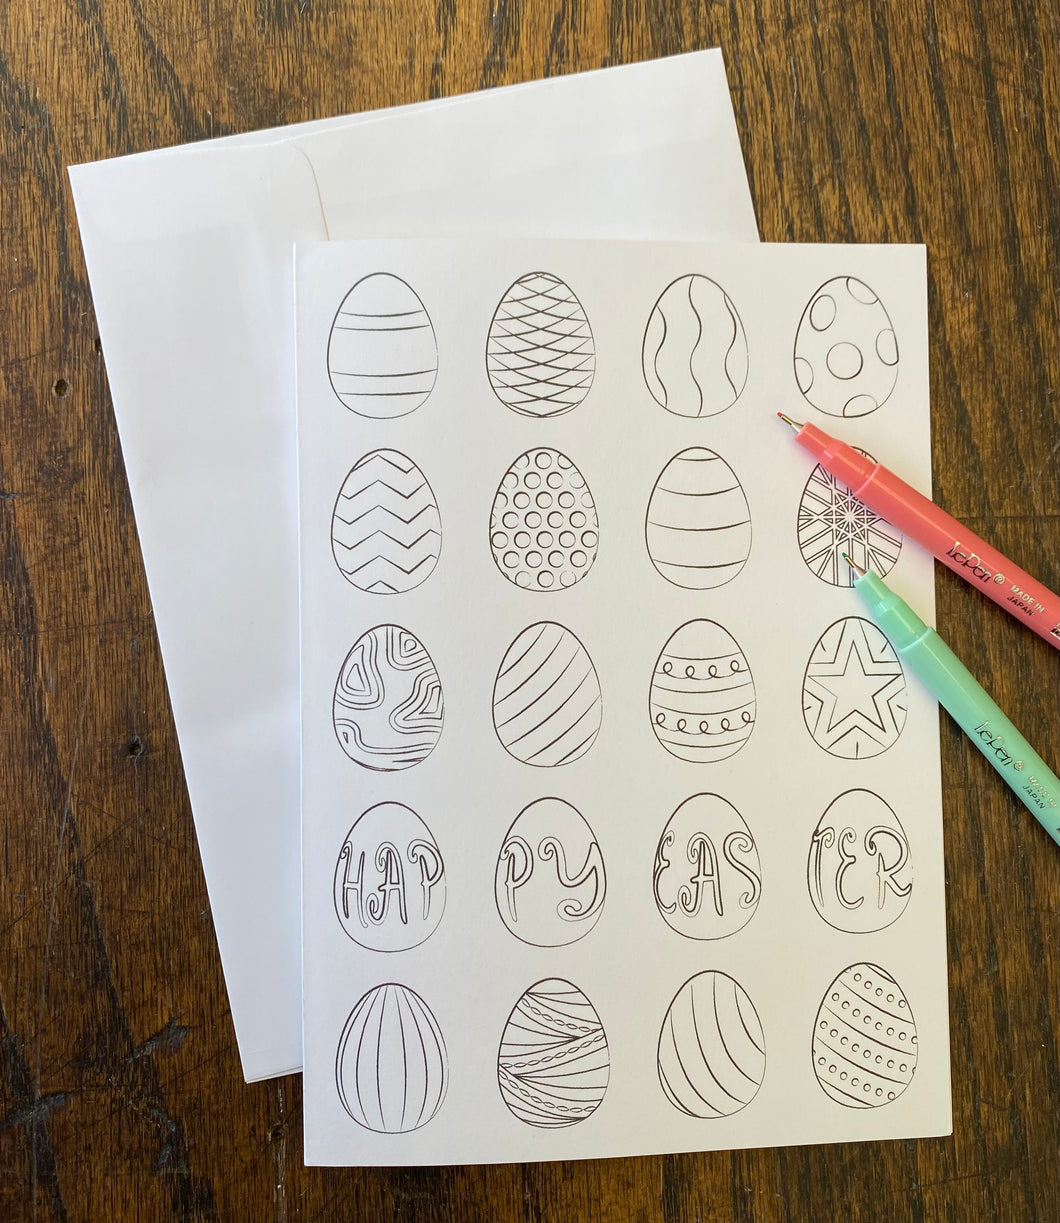 Happy Easter Coloring Card